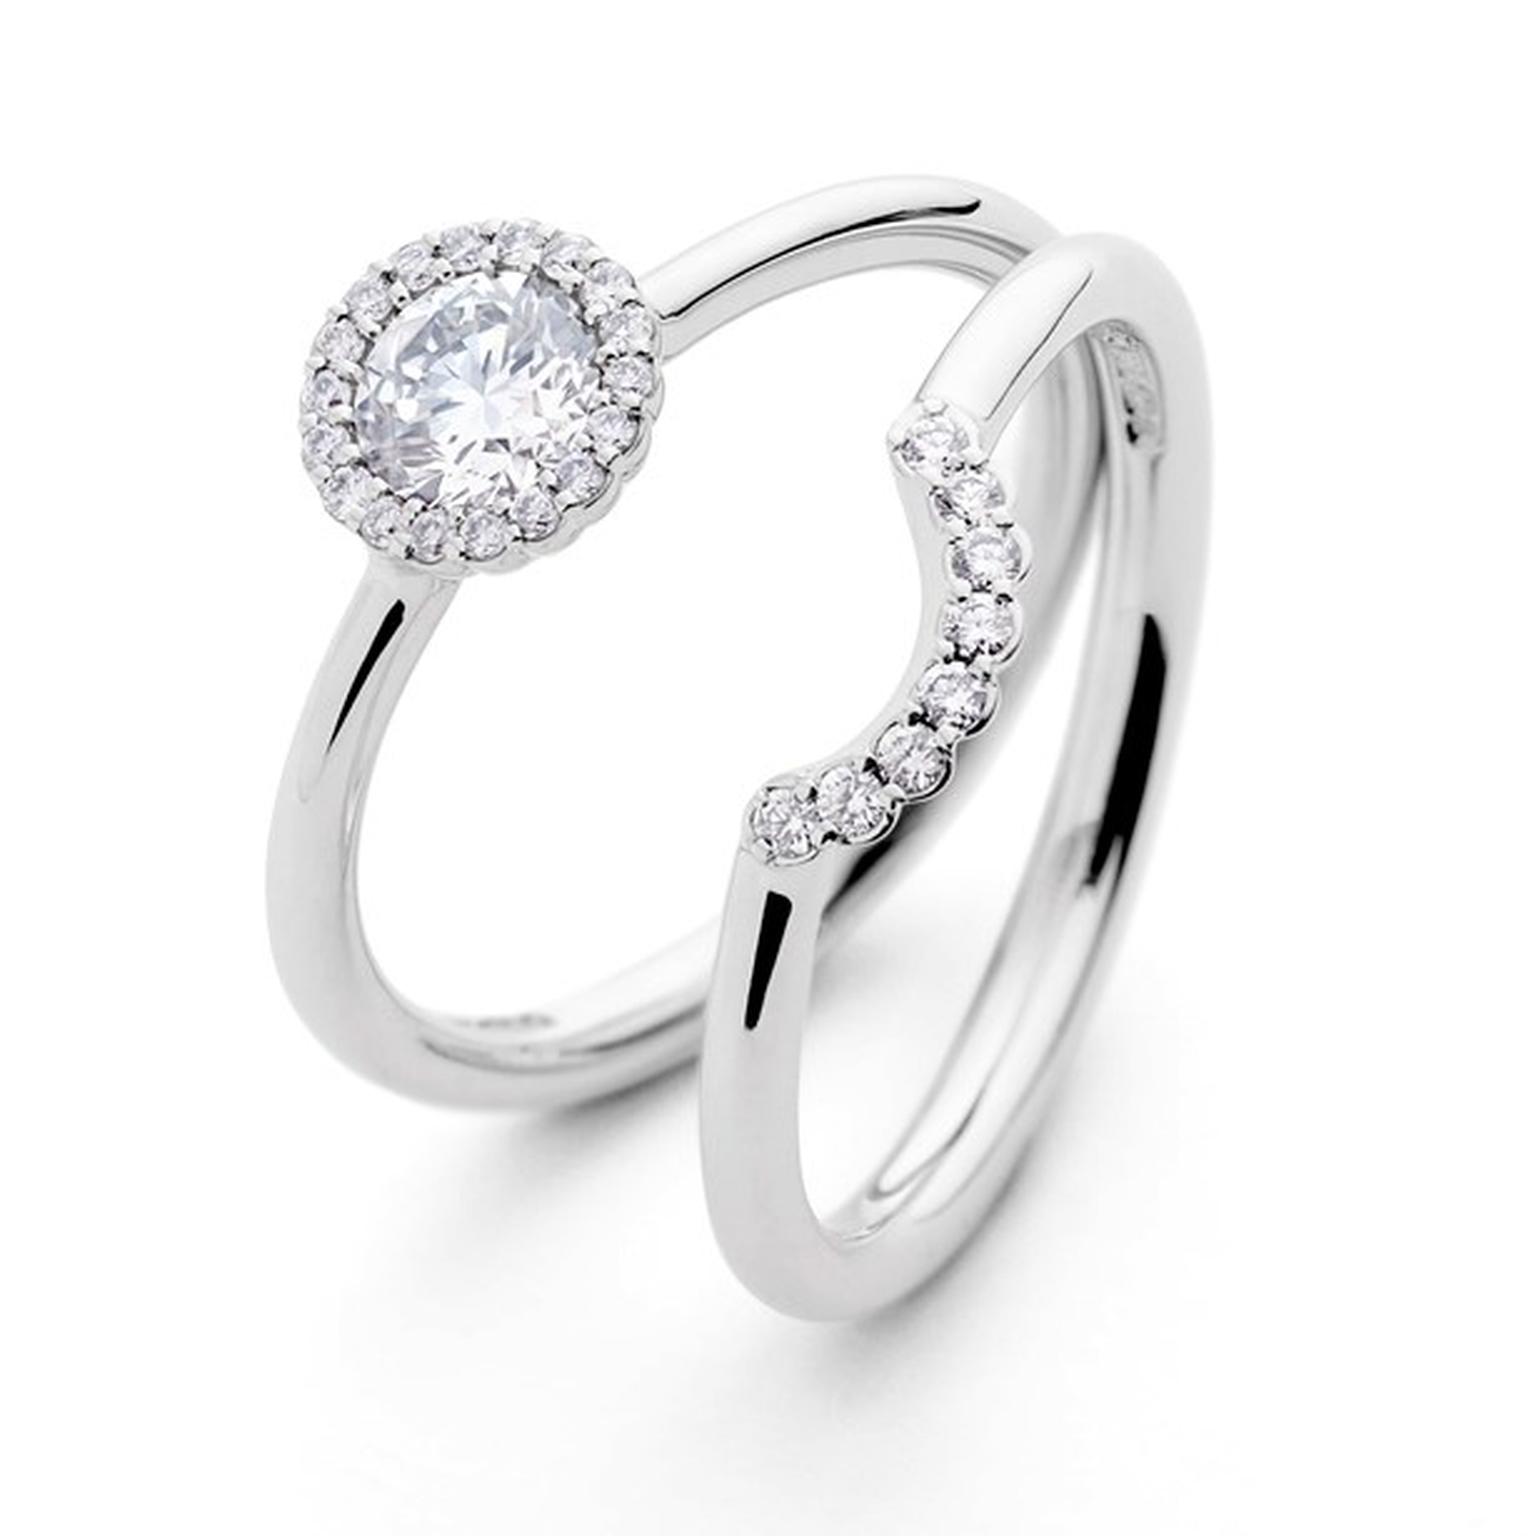 Andrew Geoghegan bridal set featuring a brilliant-cut diamond engagement ring with a surrounding pavé of diamonds and a coordinating pavé-diamond wedding band (£4,570).